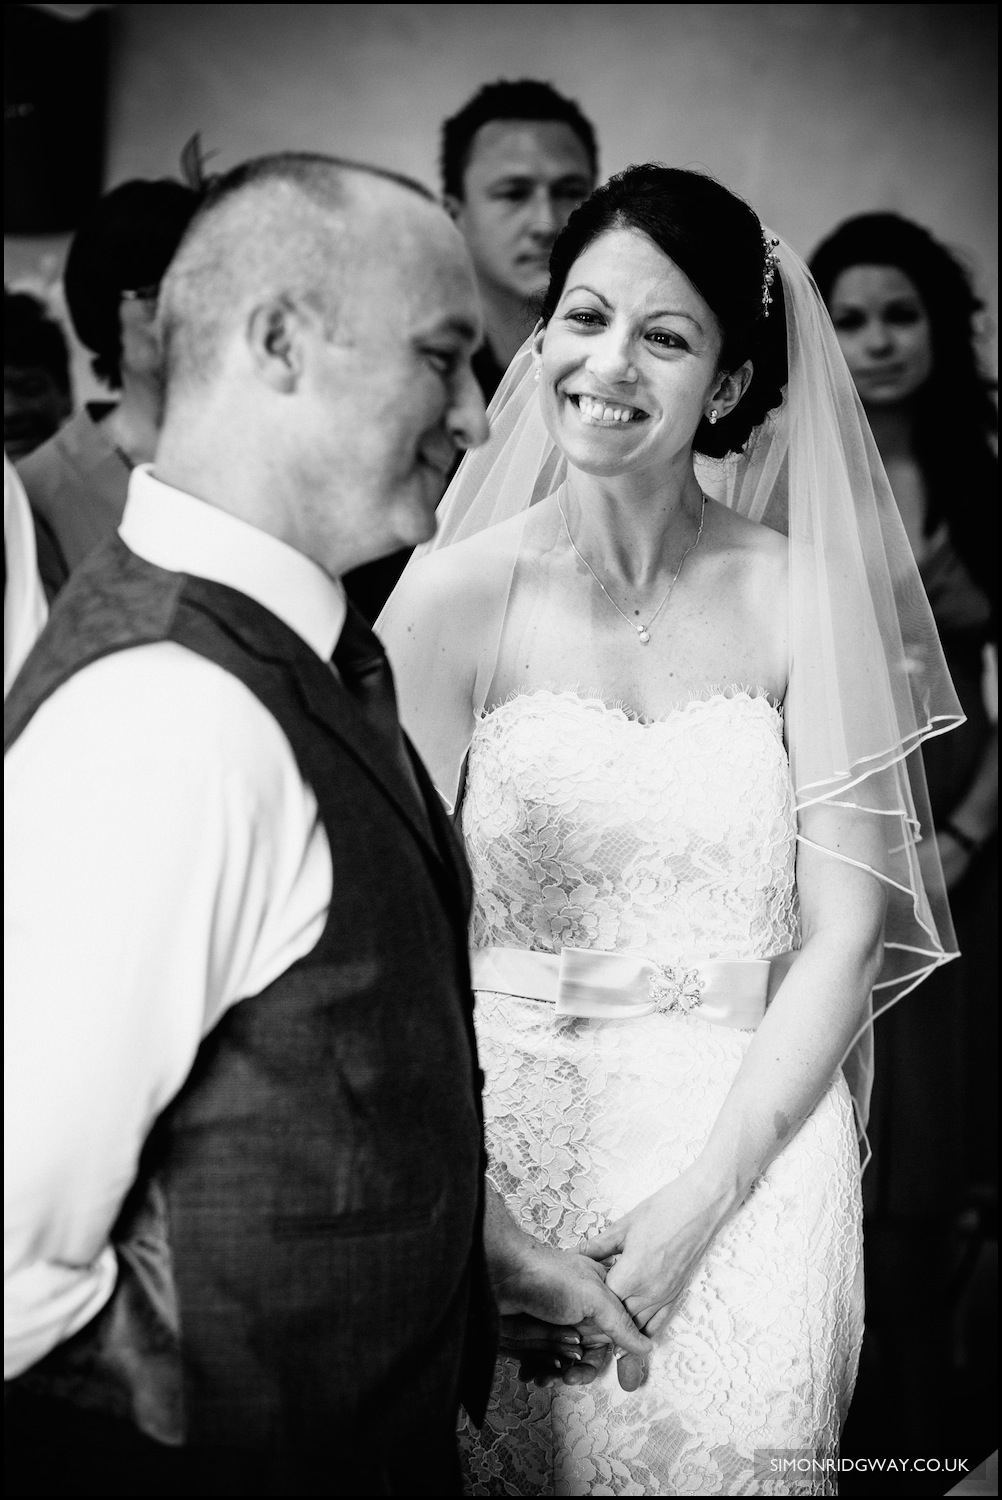 Wedding photography at Oxleaze Barn in the Cotswolds